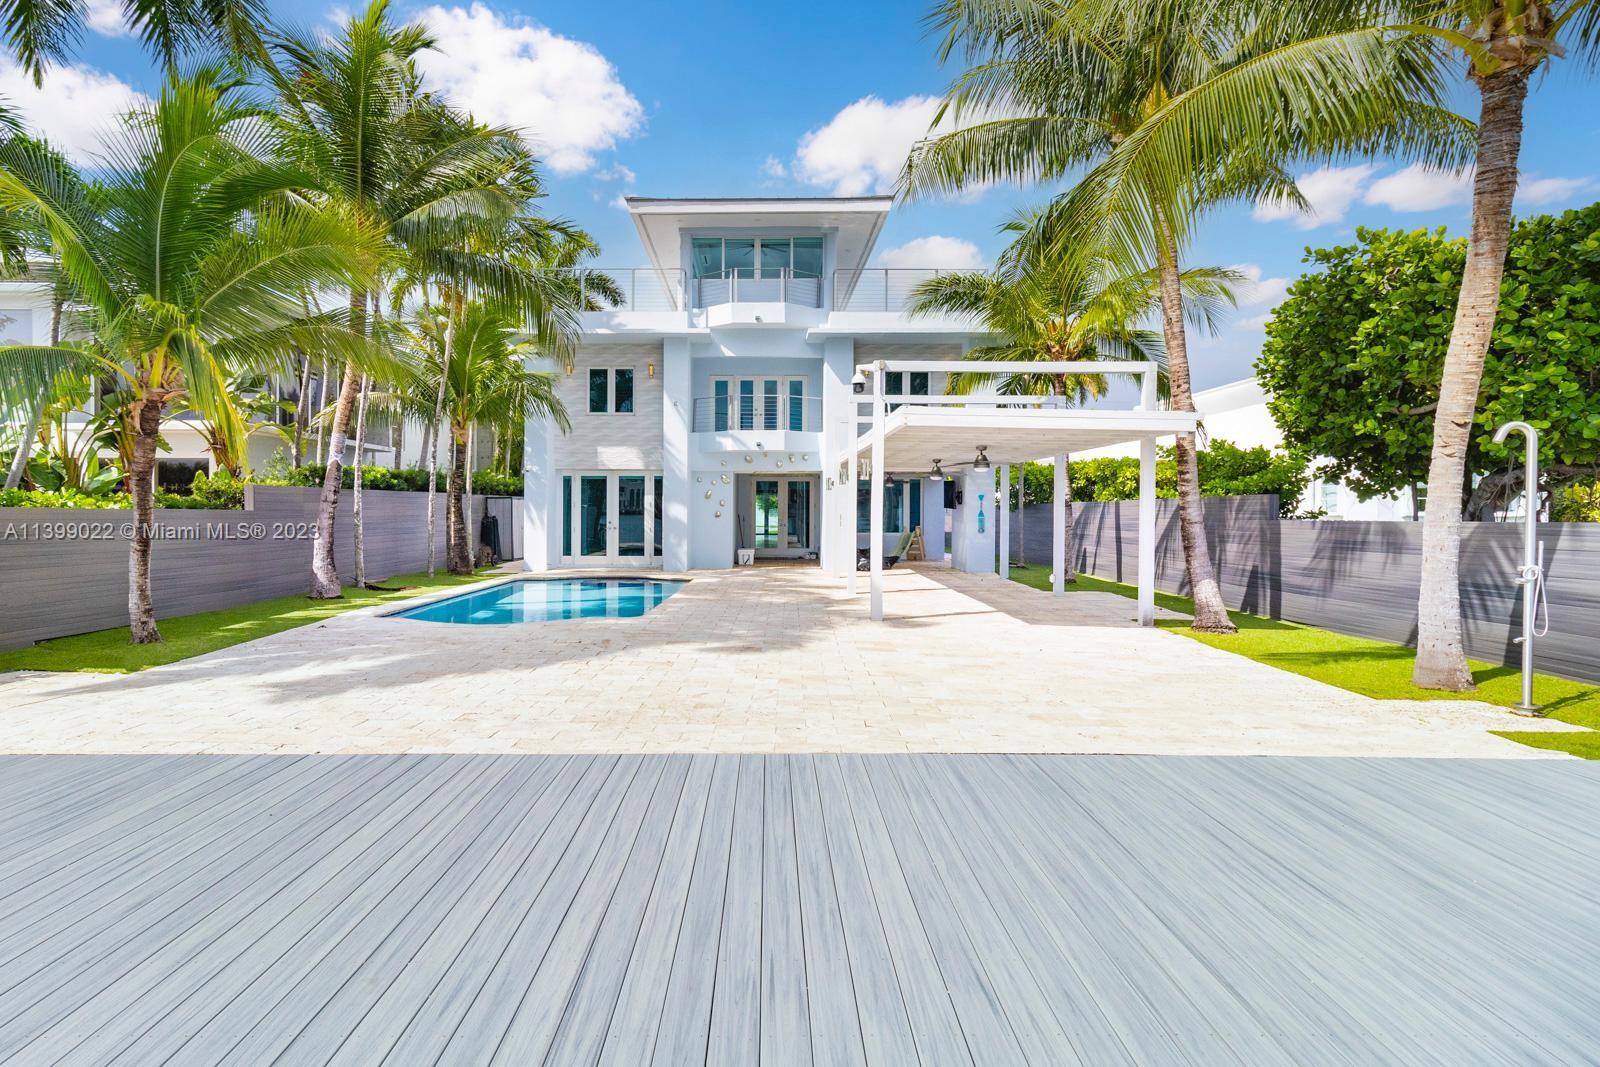 This spectacular waterfront home has been totally renovated with a construction upgrade of a new entrance and third floor railings in 2019. All the bedrooms are in suites and facing the open bay. 5bed 5 1/2 bath with rooftop terraces. 36 x 24 CARIBBEAN BLUE marble & wood floors throughout. Beautiful kitchen with top of the line appliances, granite counter tops, impact windows, storage room, sound system, brand new back-up generator installed in 2023, solar heated pool, new dock and new 50 linear foot seawall. New floating lift that holds up to 25, 000 lbs, and a floating dock for 2 jet ski. The Second and third floor of the house were built in 1989. With breathtaking views this beautiful property is ready for a new owner. Come enjoy the gorgeous view of the bay, Venetian islands and Miami.